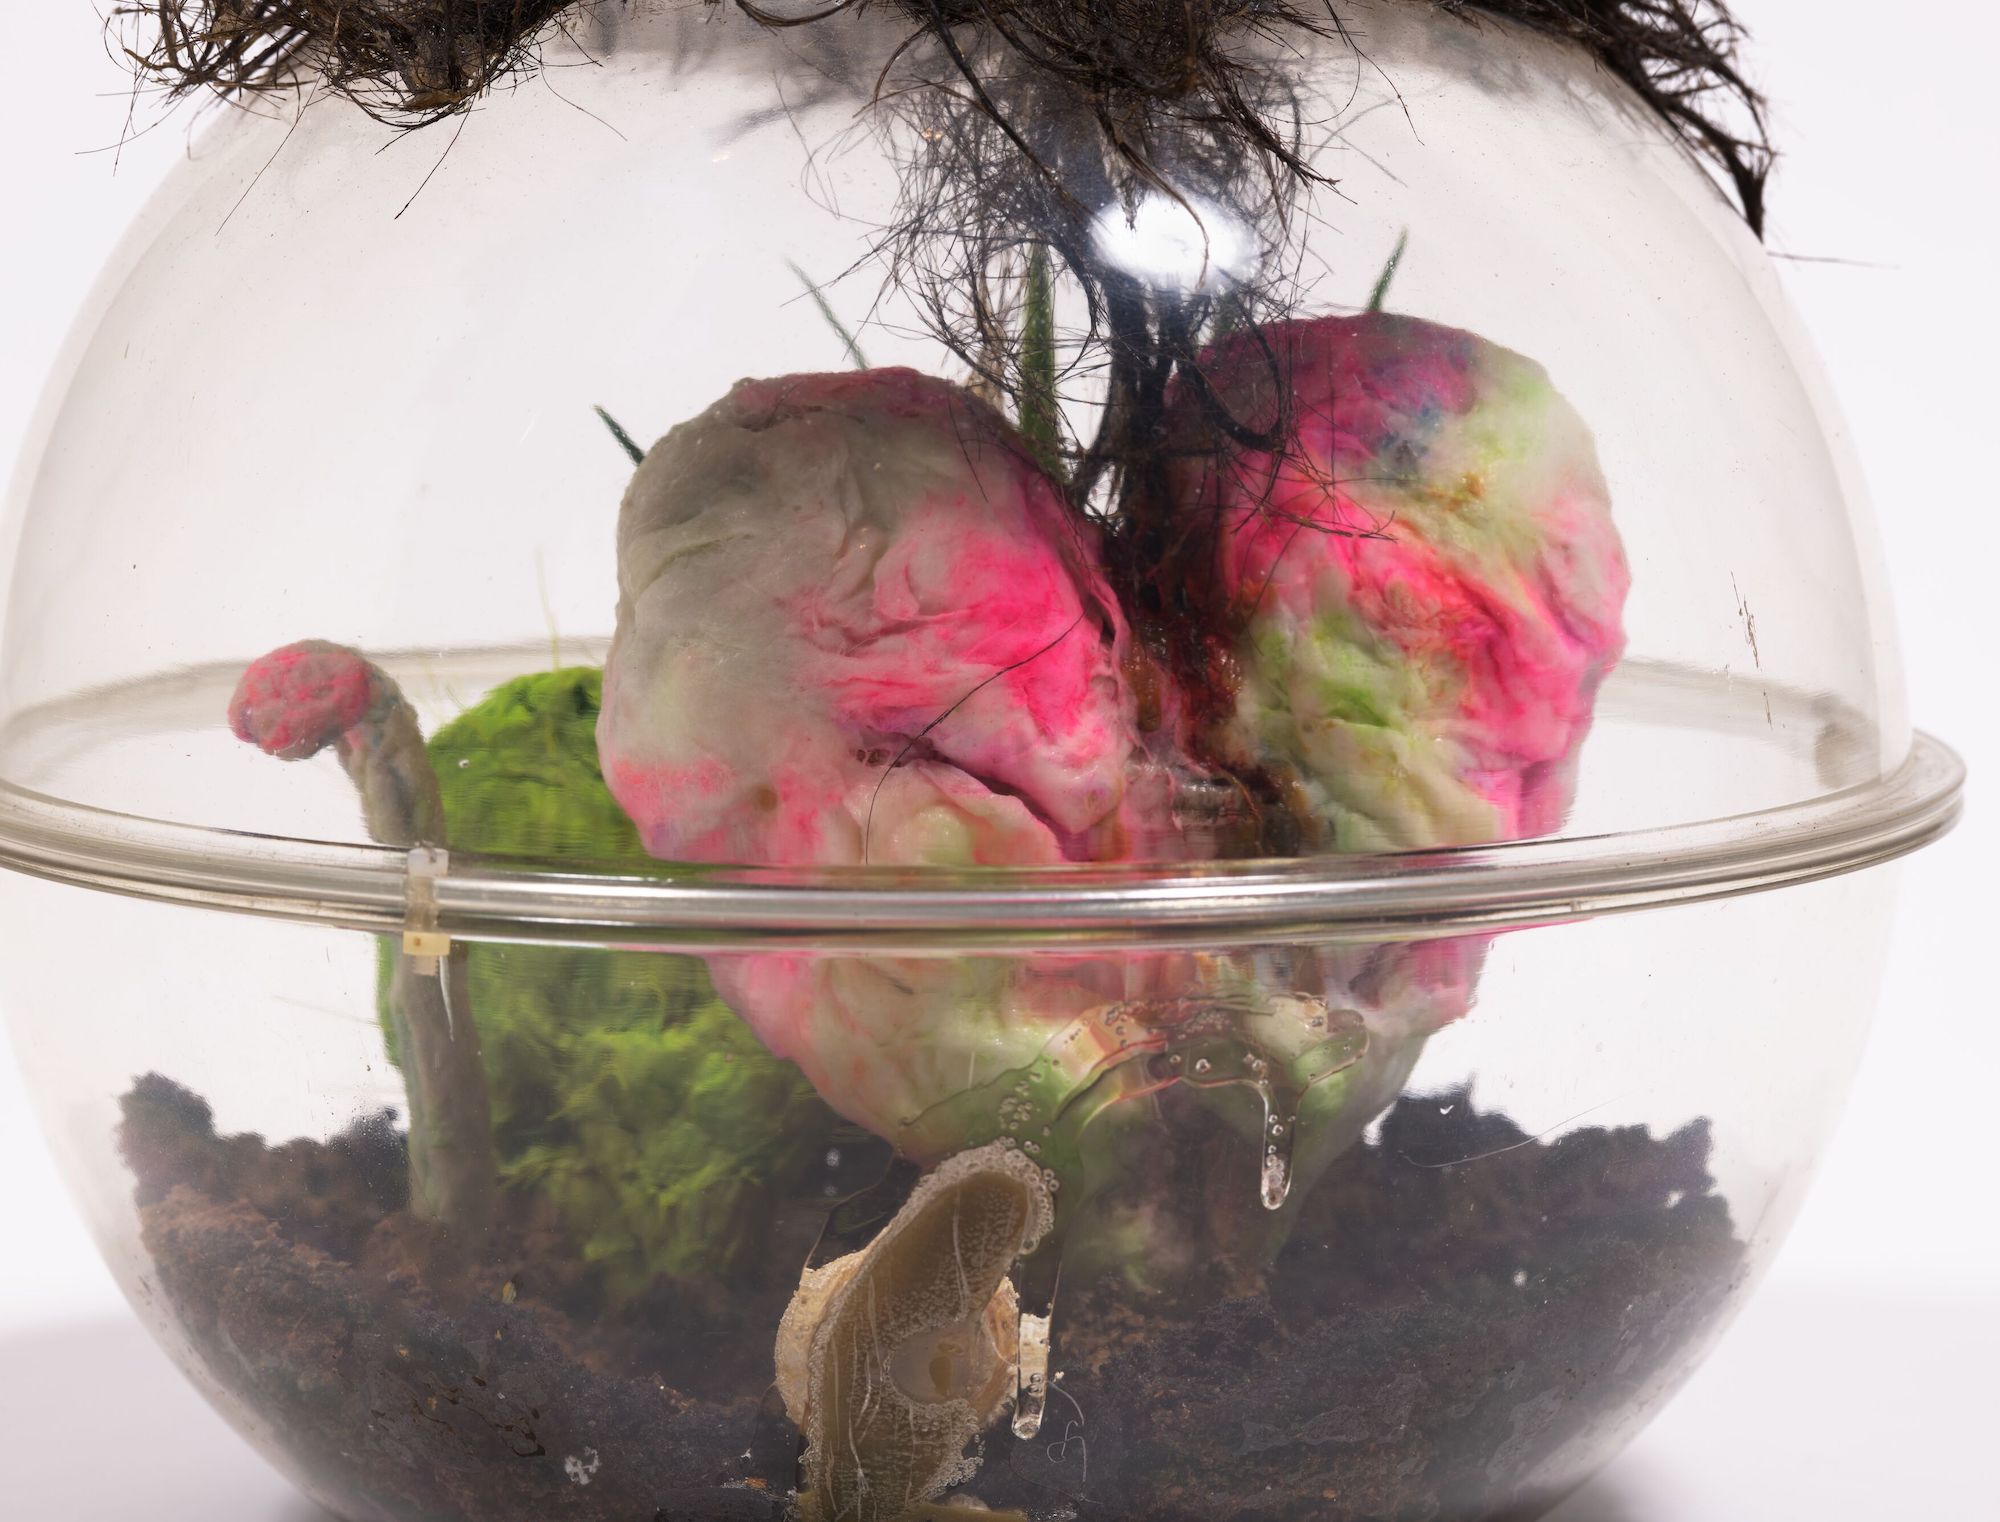 A clear spherical enclosure houses soil like a terrarium with bits of hair, a plastic or felt like heart and what appears to be a slug leaving a trail of mucus across the surfce.